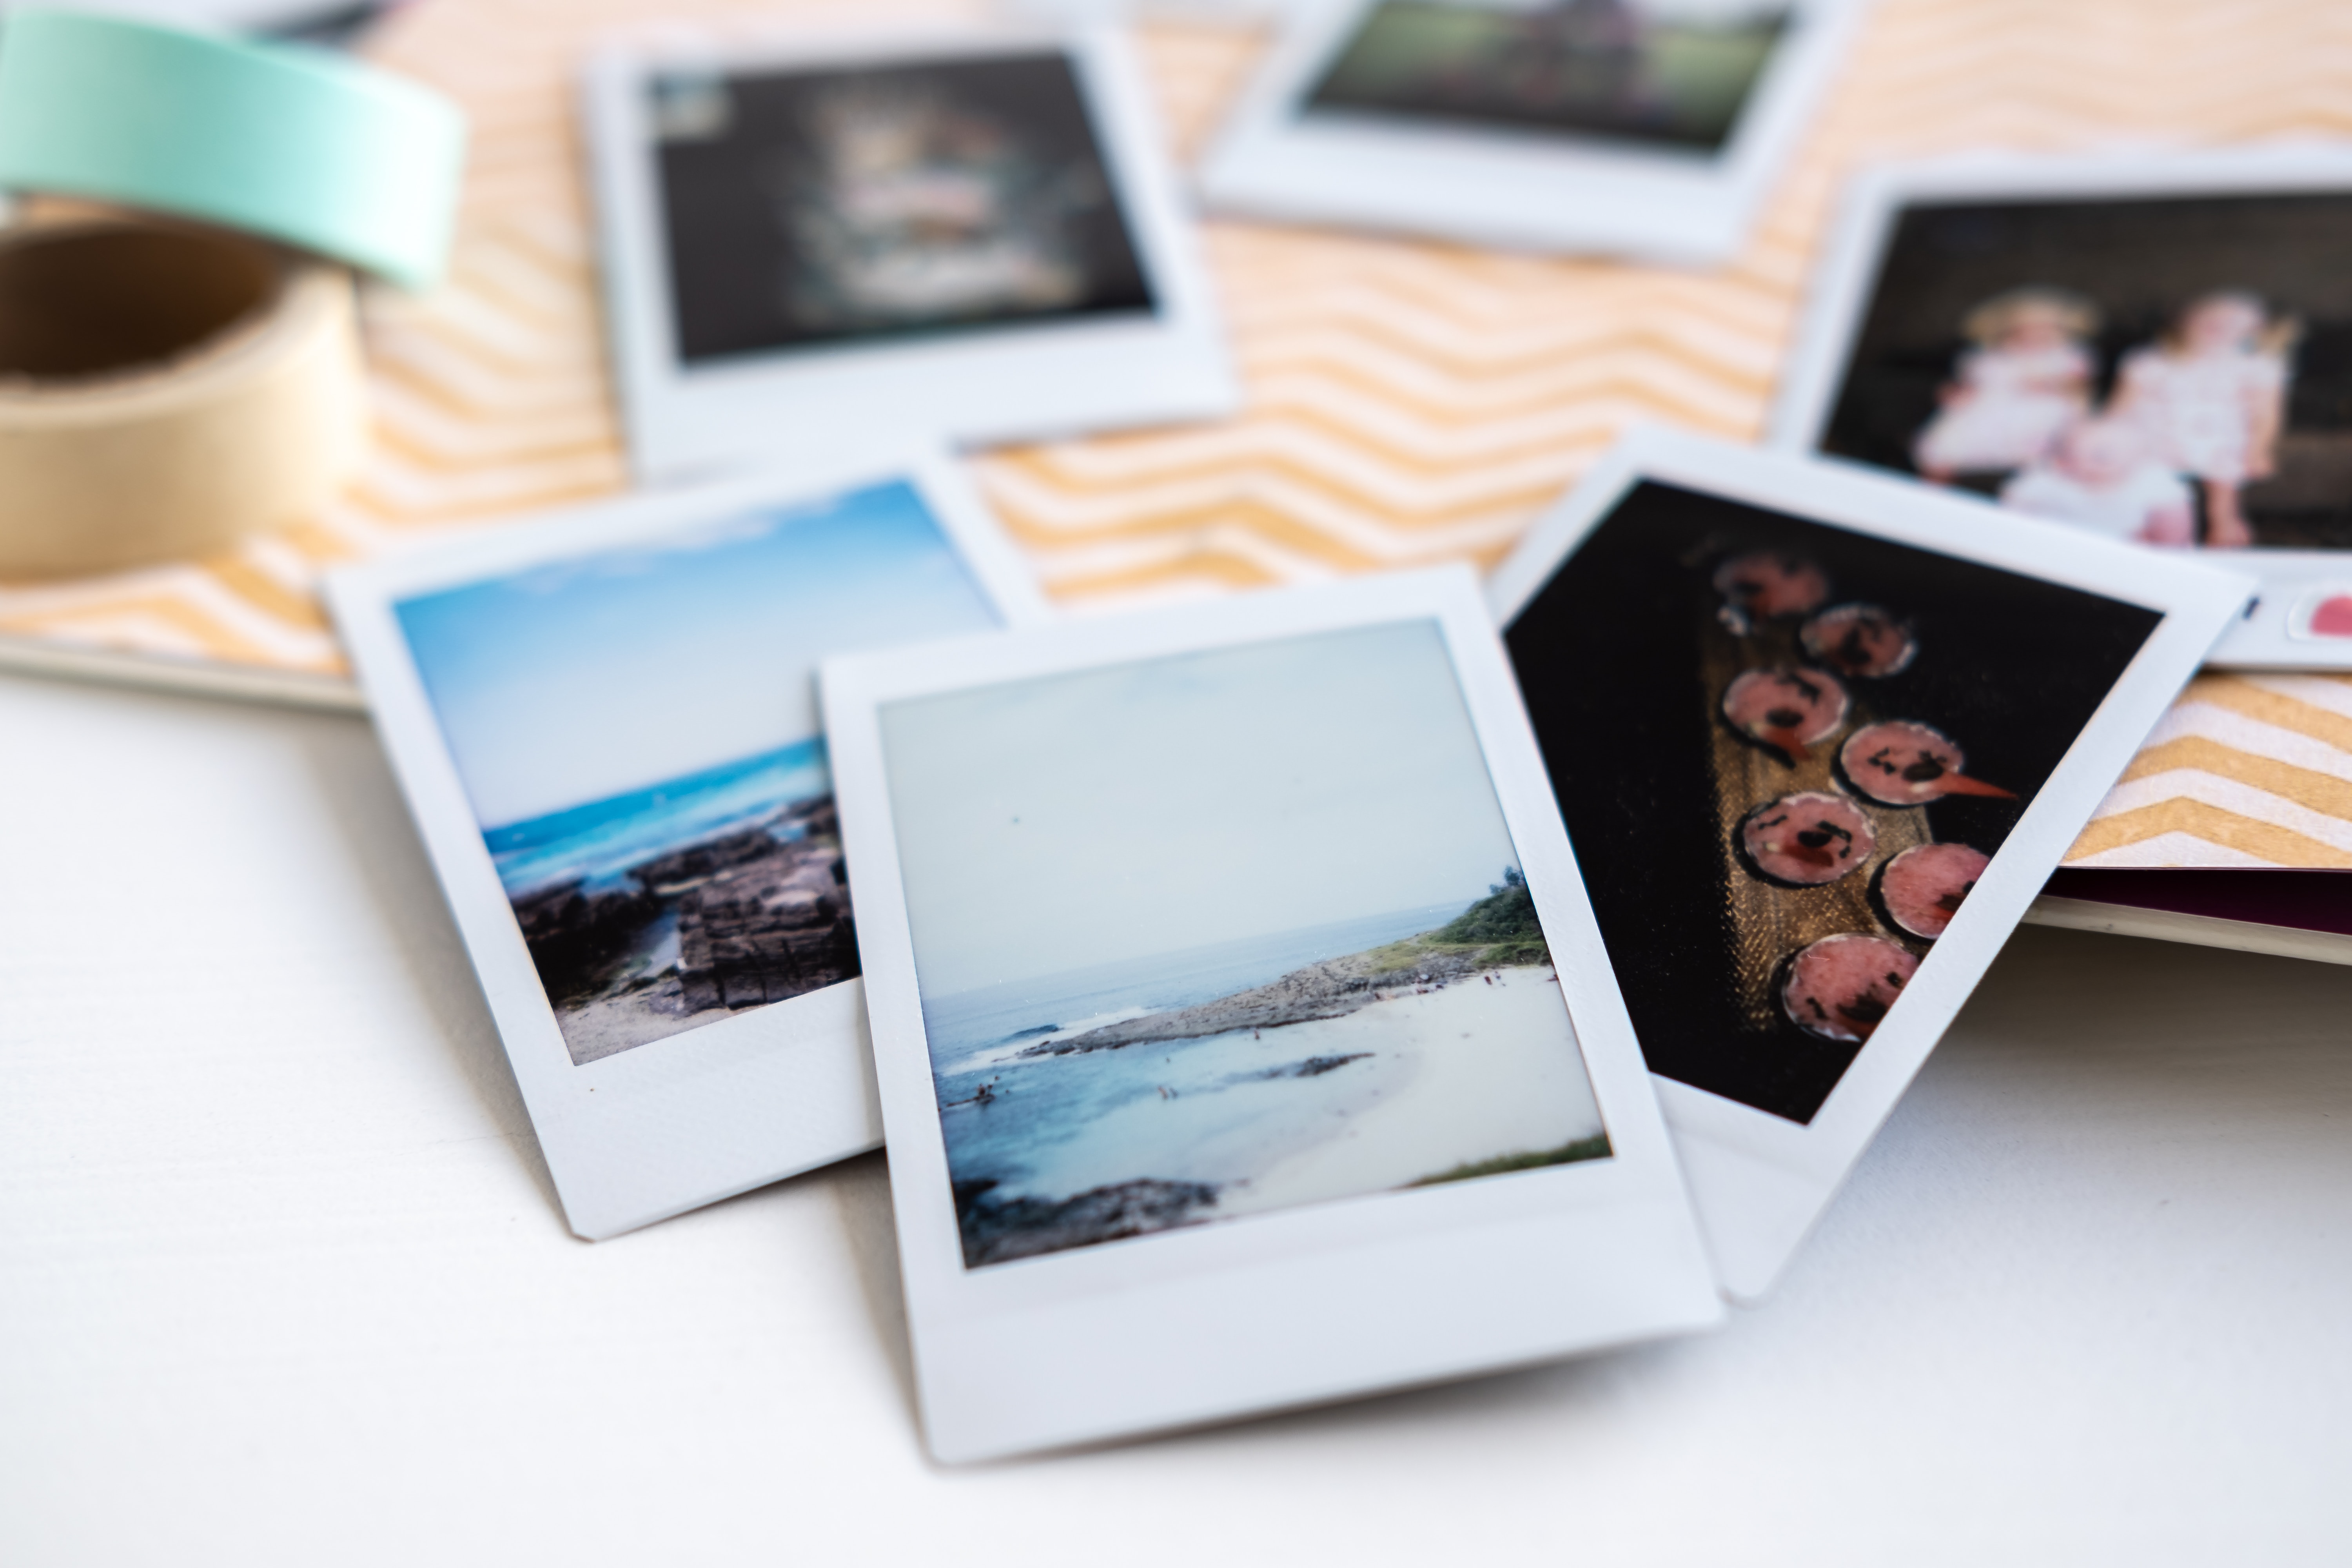 Polaroid images of holidays given from employee rewards